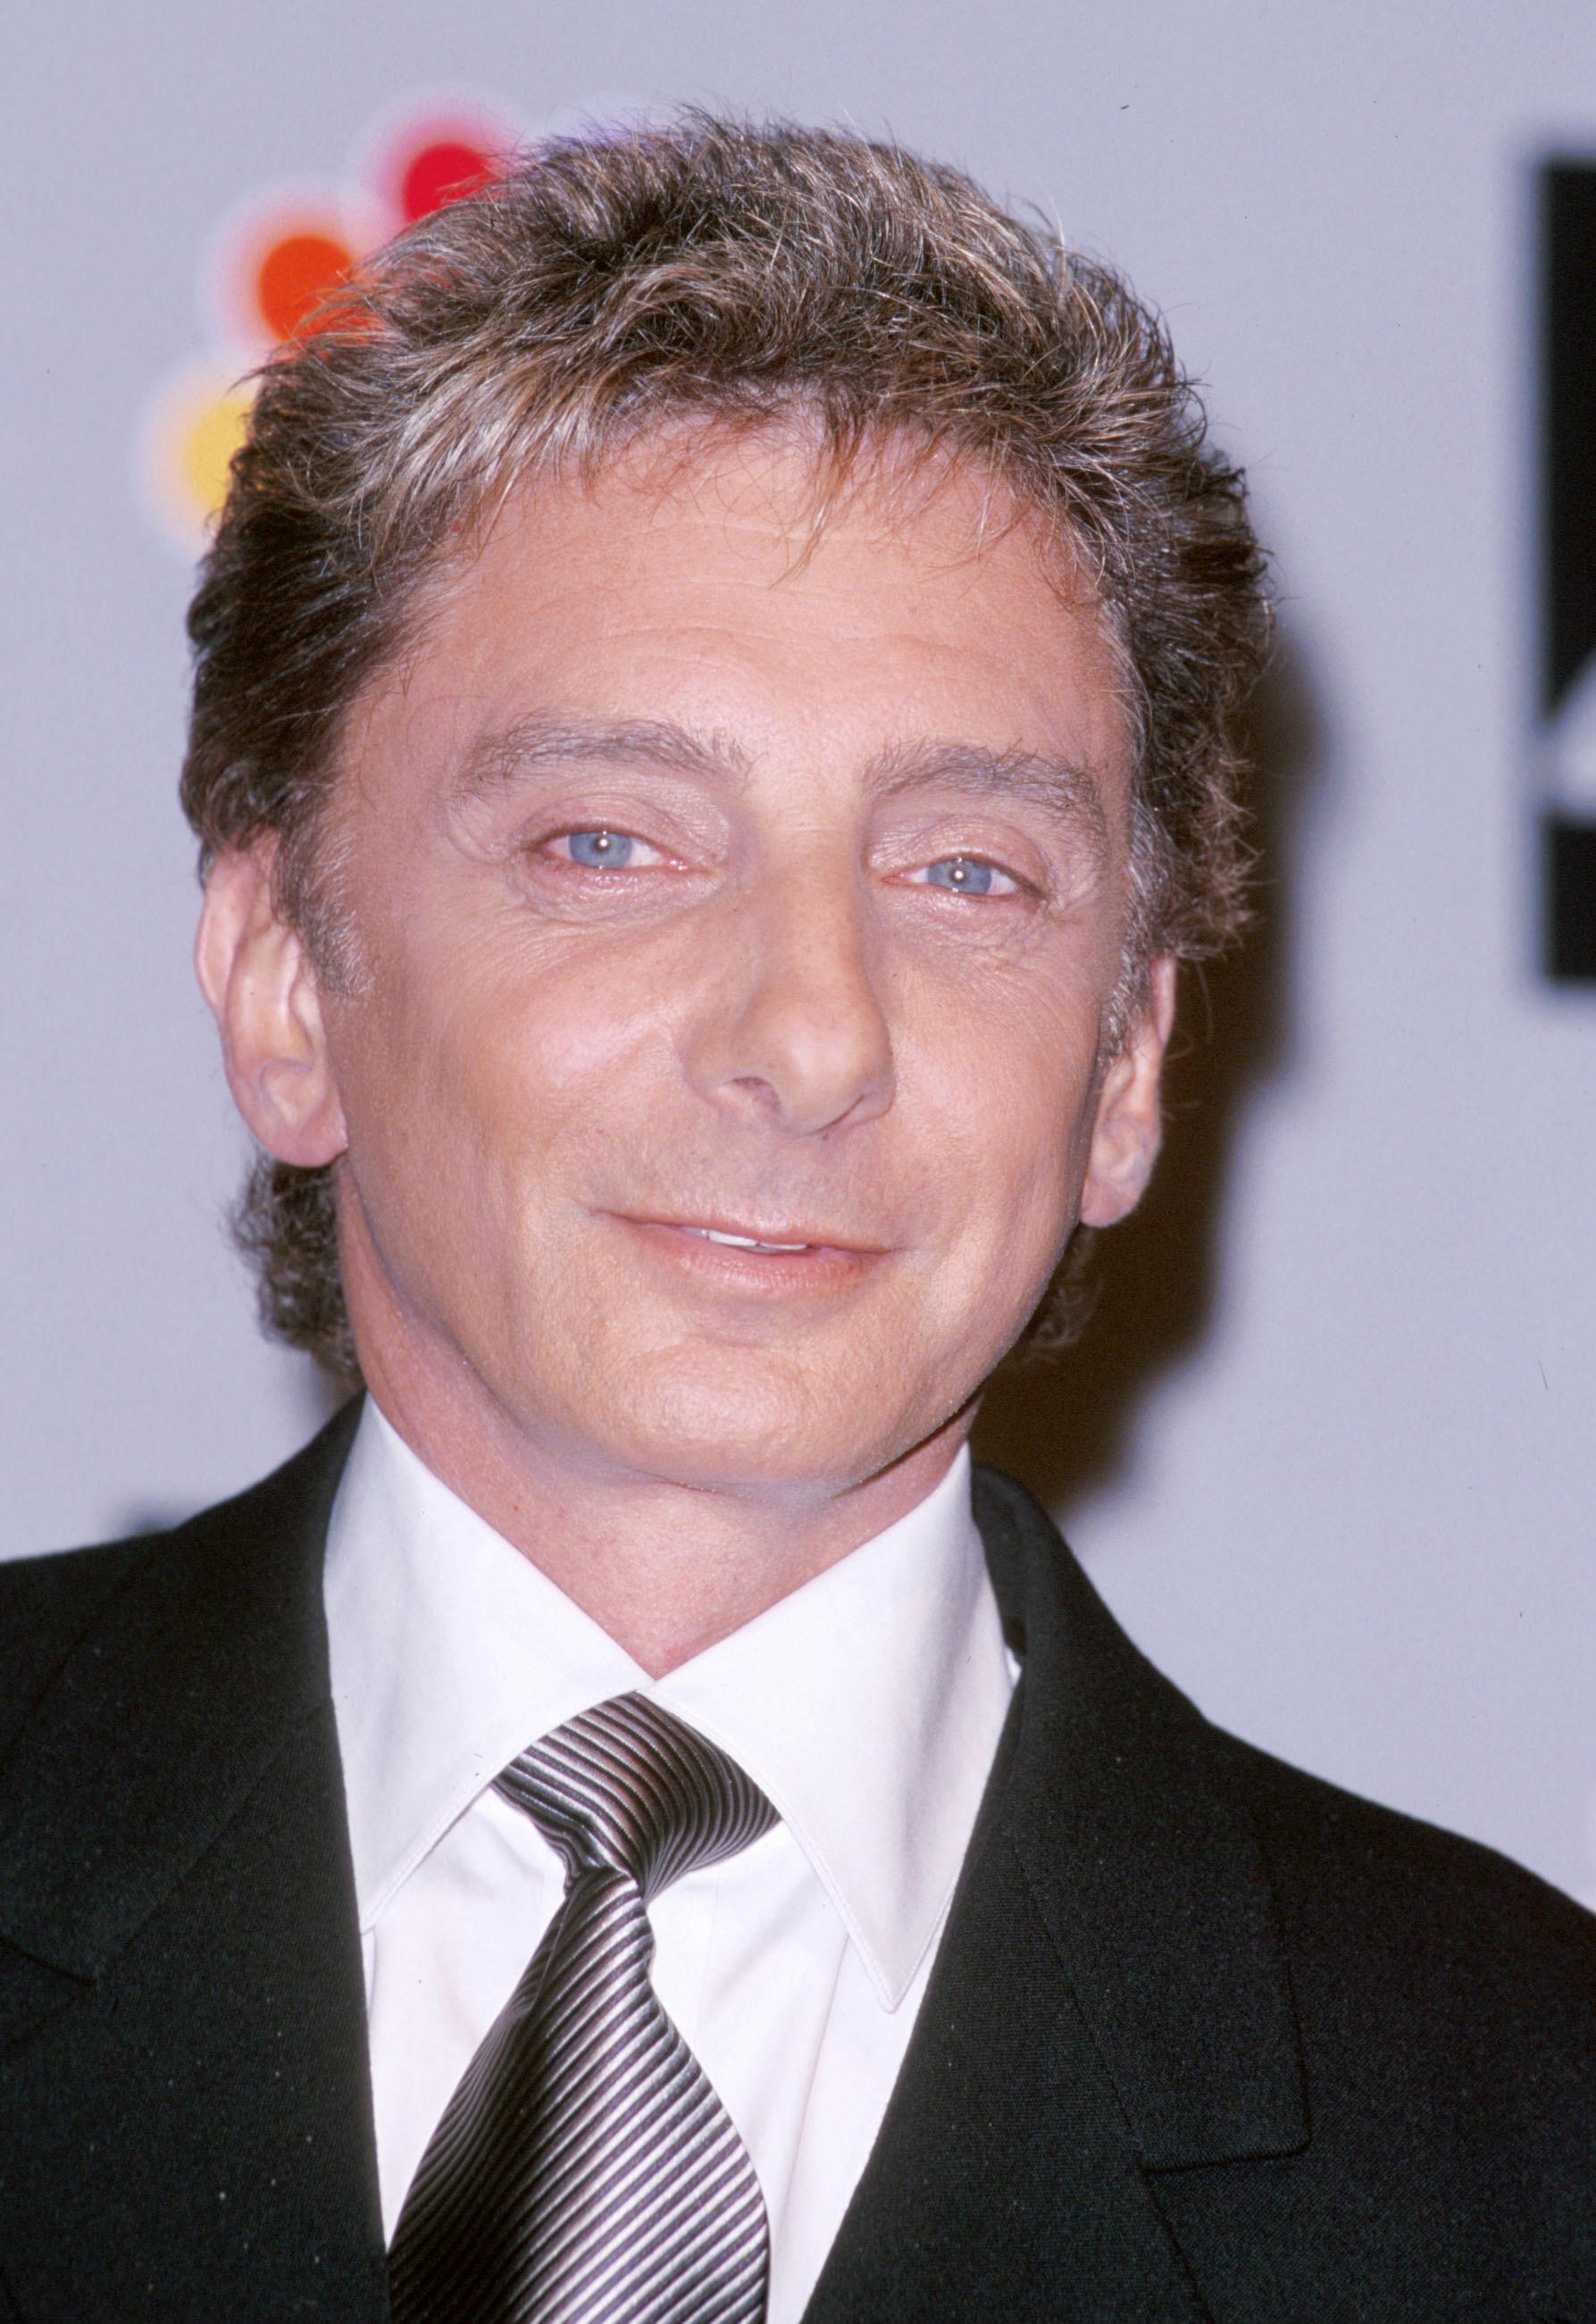 JosepineJackson image Barry Manilow HD wallpaper and background